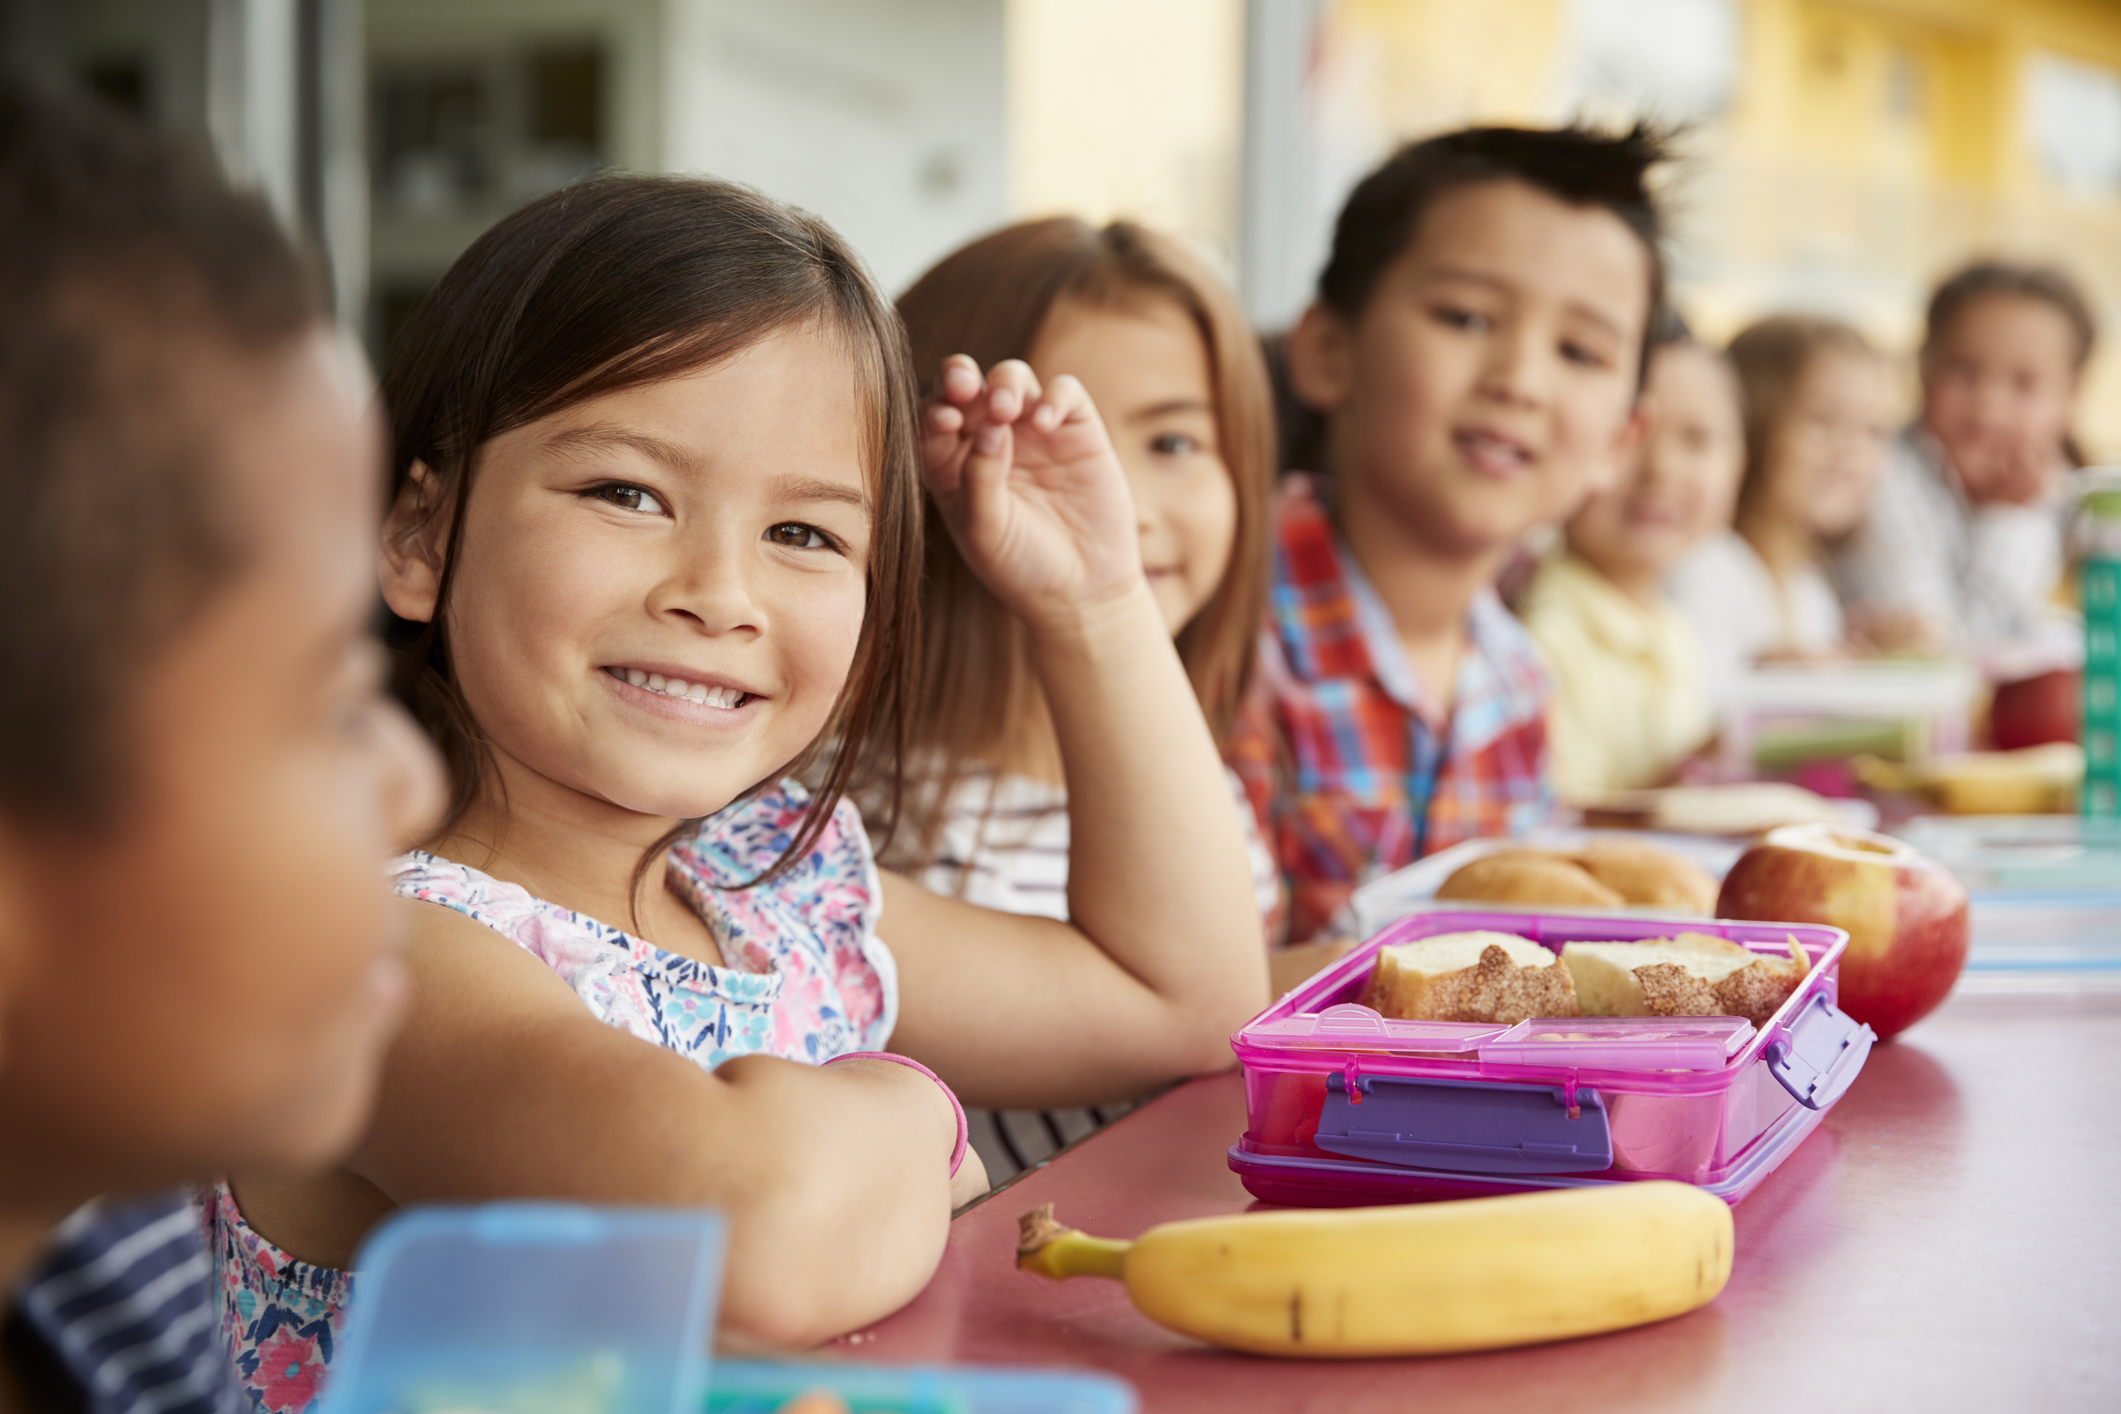 Group of smiling children eating their lunch together